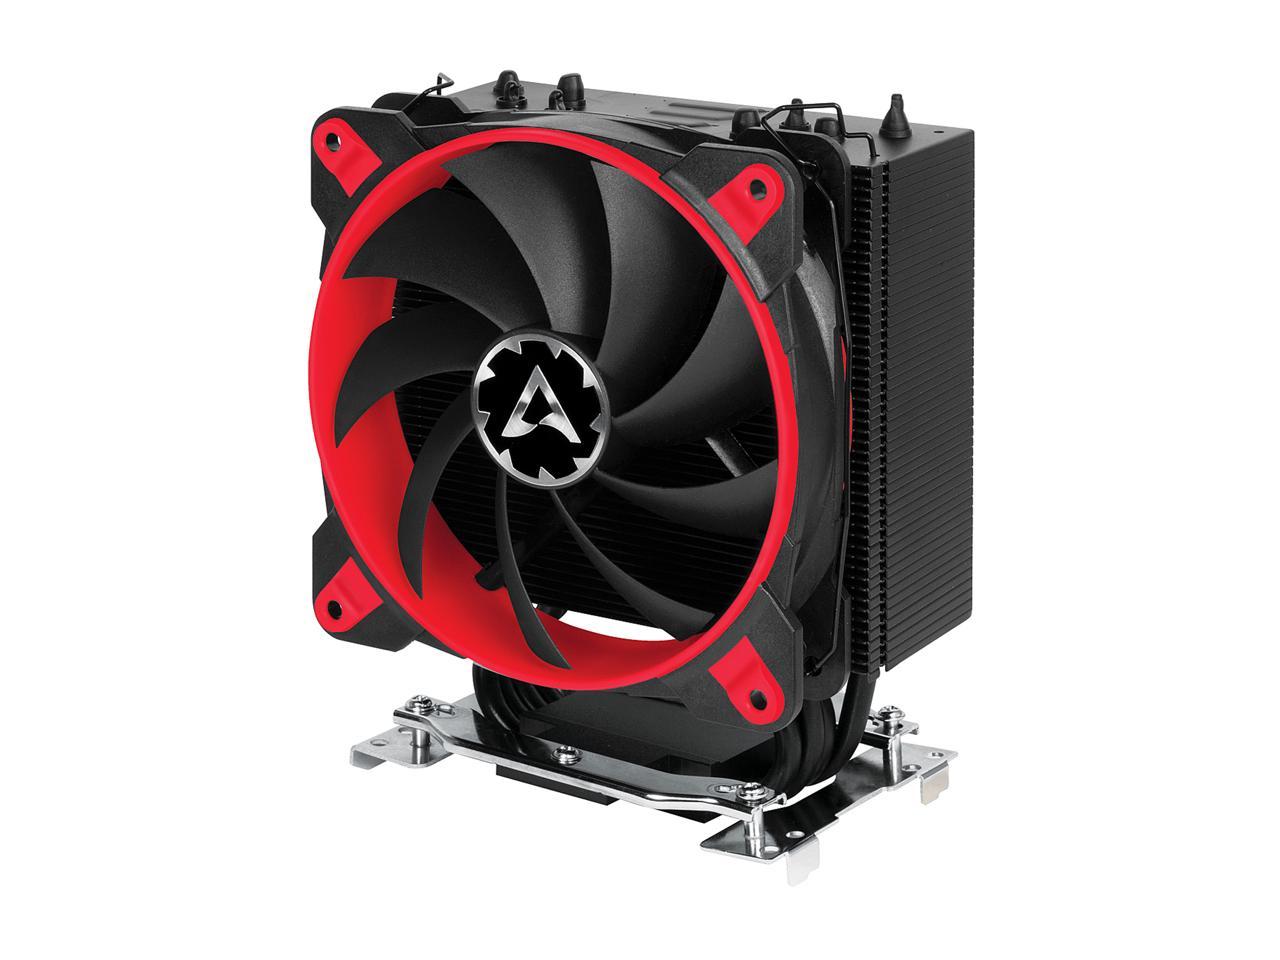 Arctic Freezer 33 TR Tower CPU Cooler for AMD Ryzen Threadripper White sTR4 I Silent 3-Phase-Motor and wide range of regulation 200 to 1800 RPM 